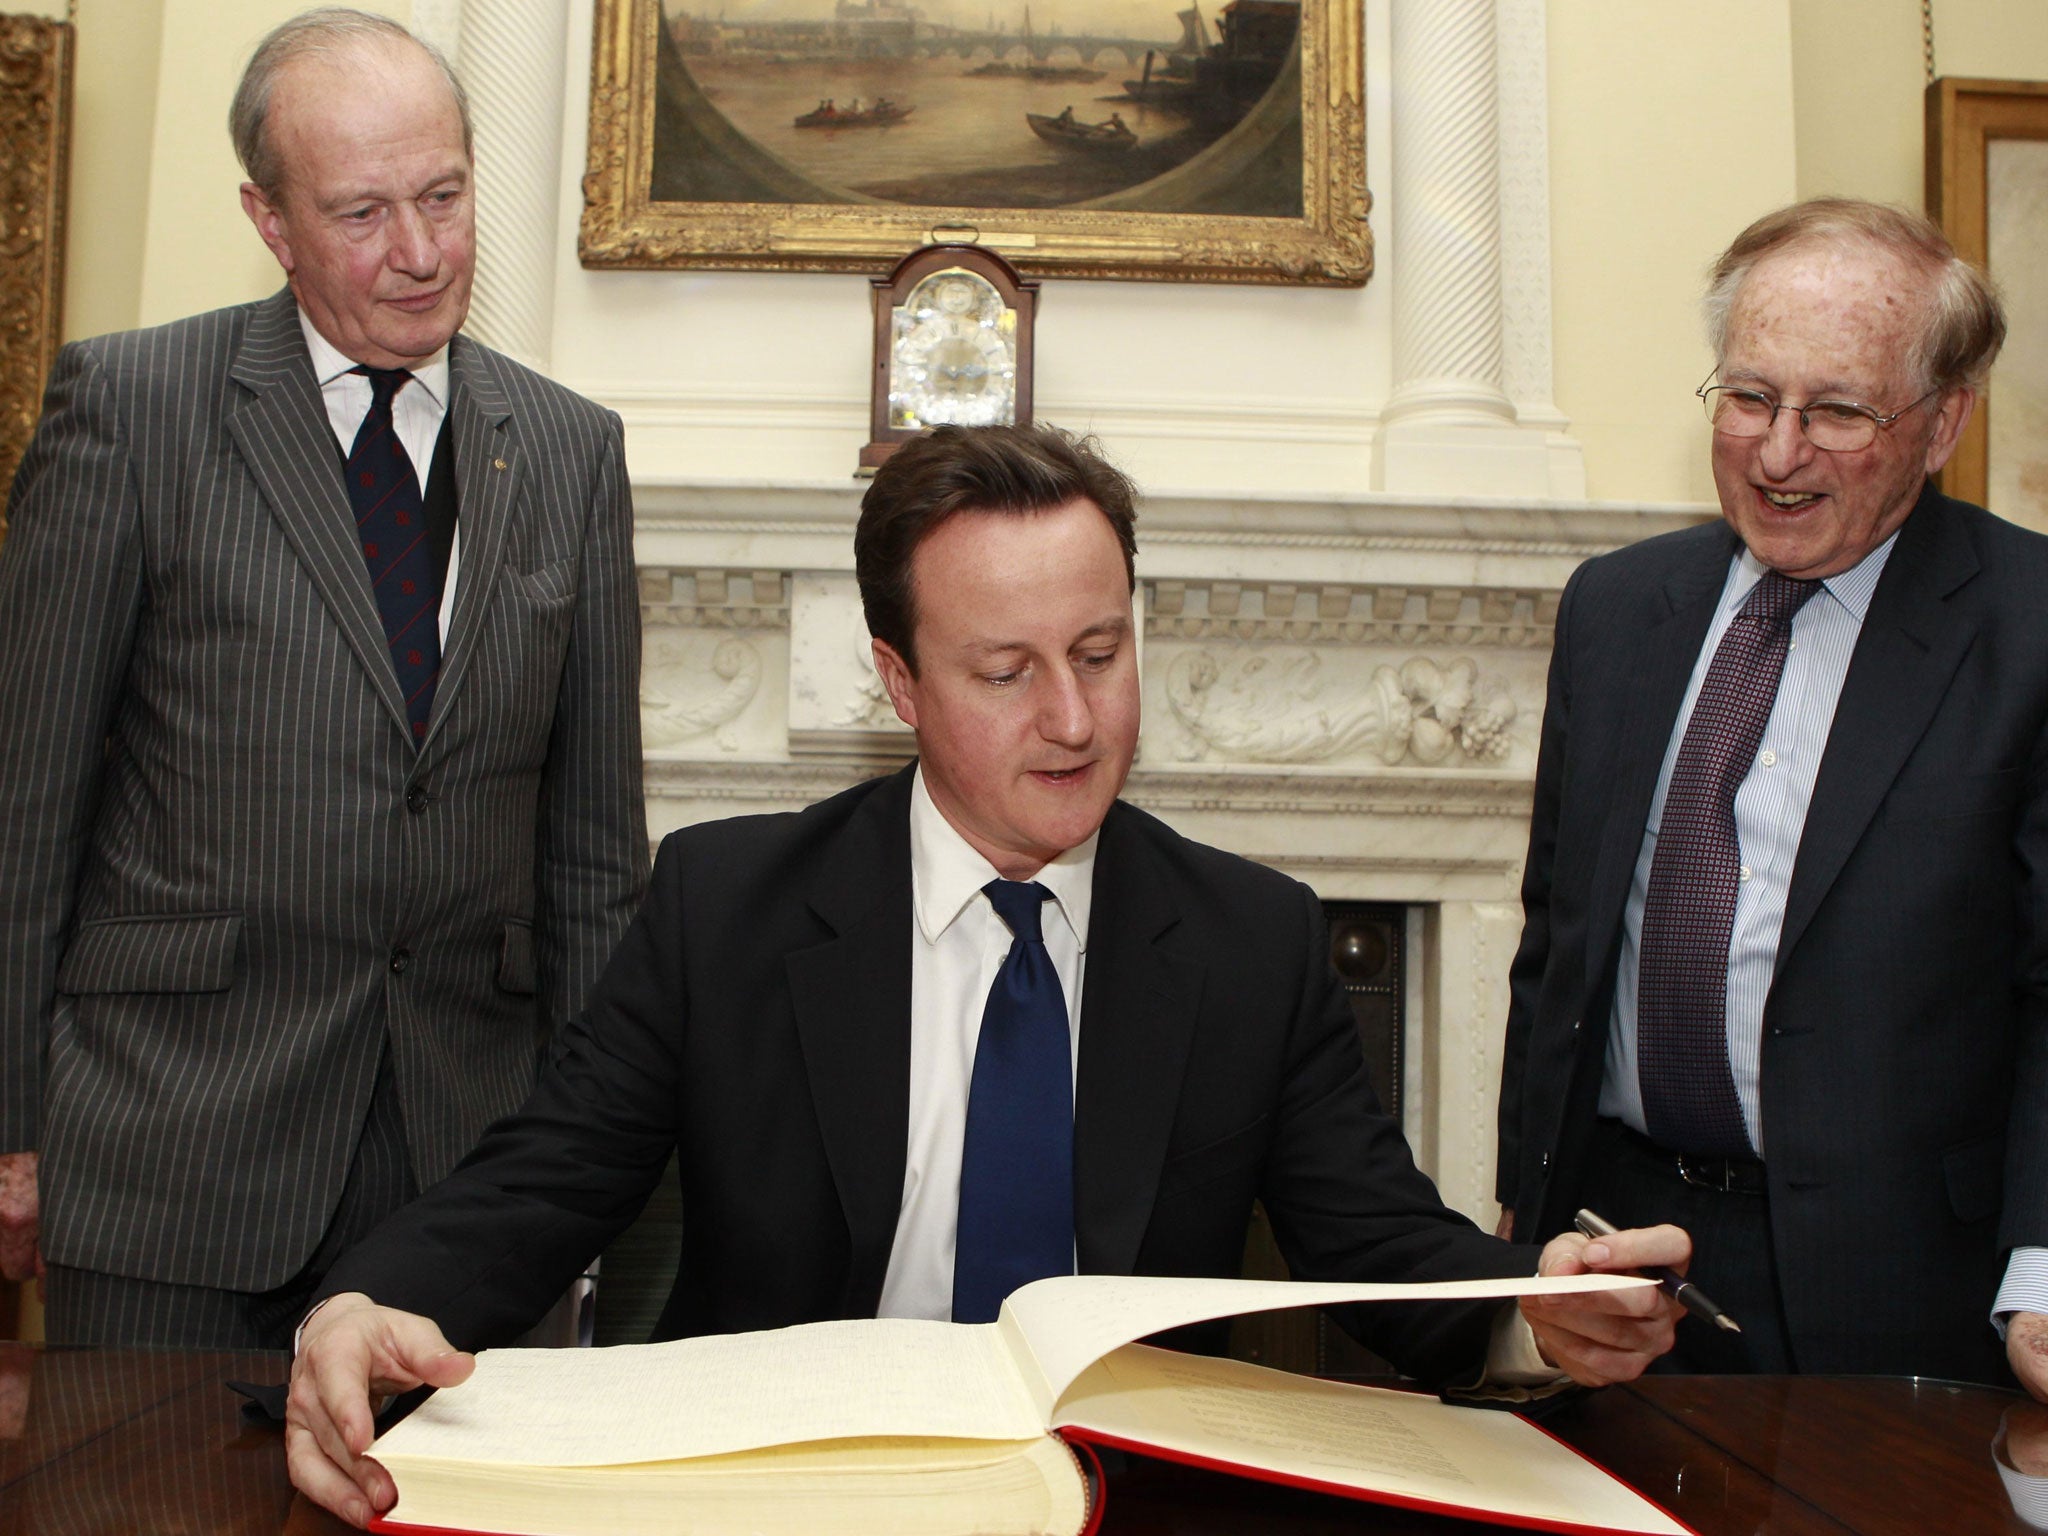 The Prime Minister in 2011 with Greville Janner to his right